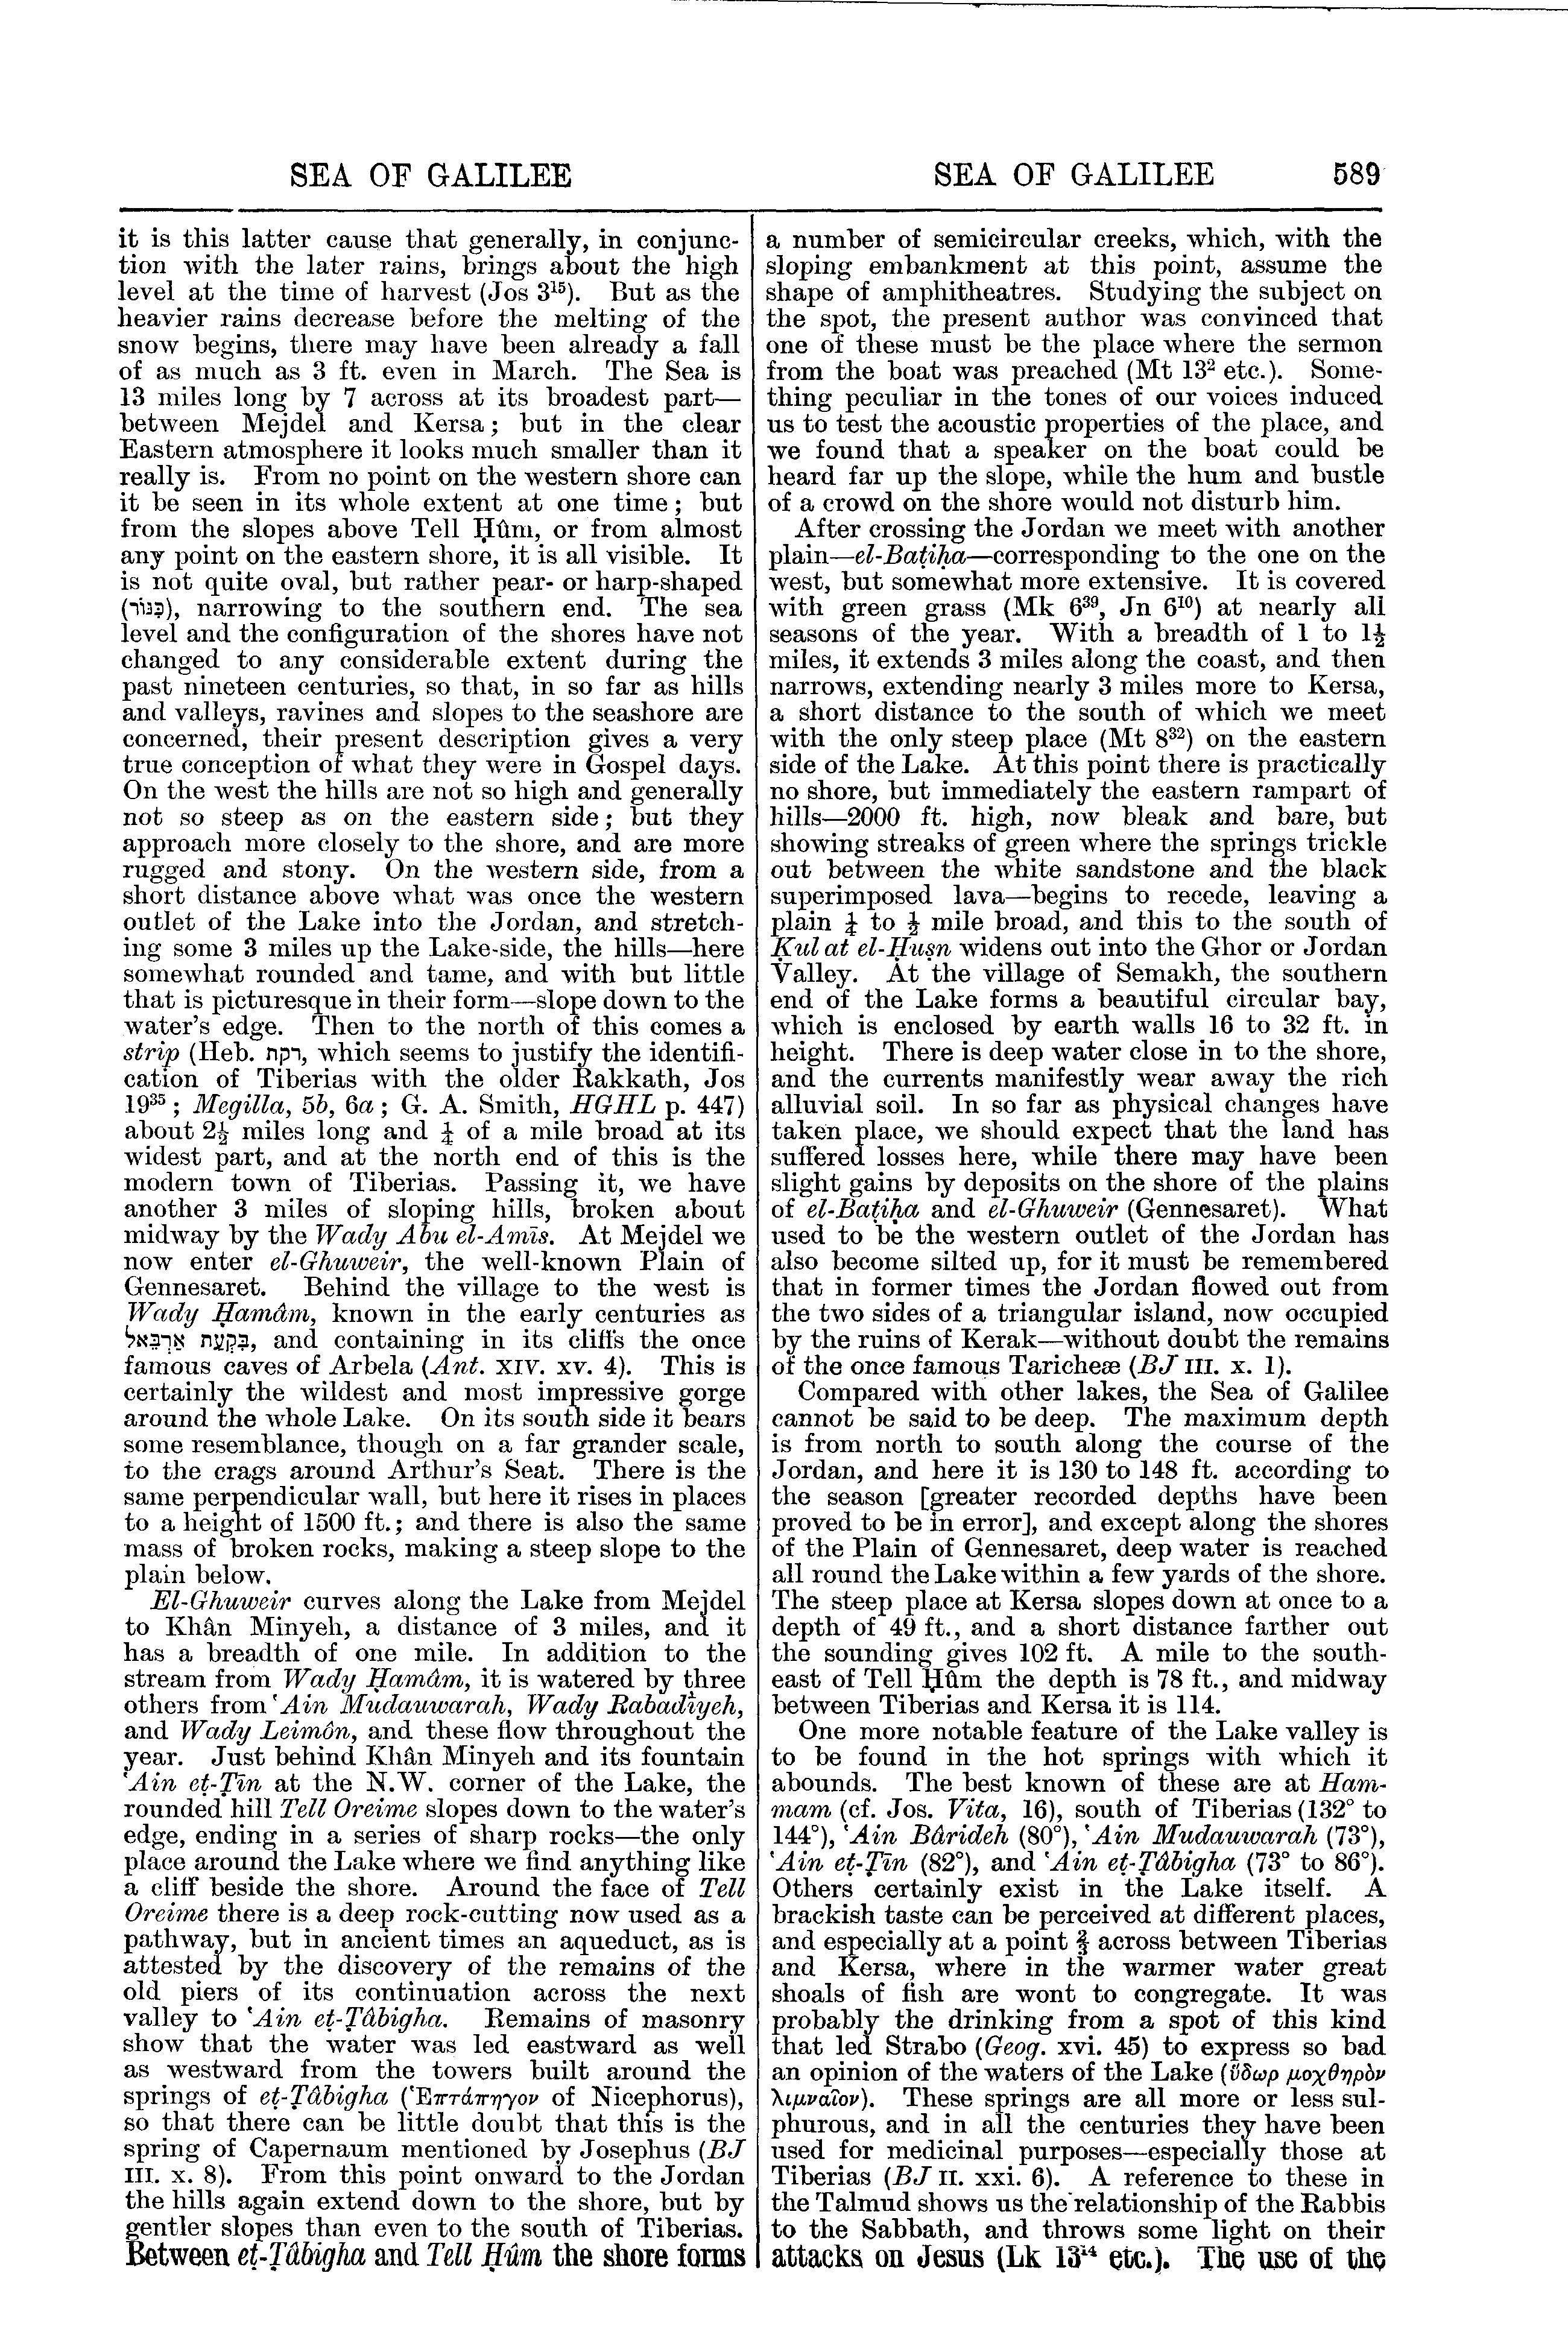 Image of page 589